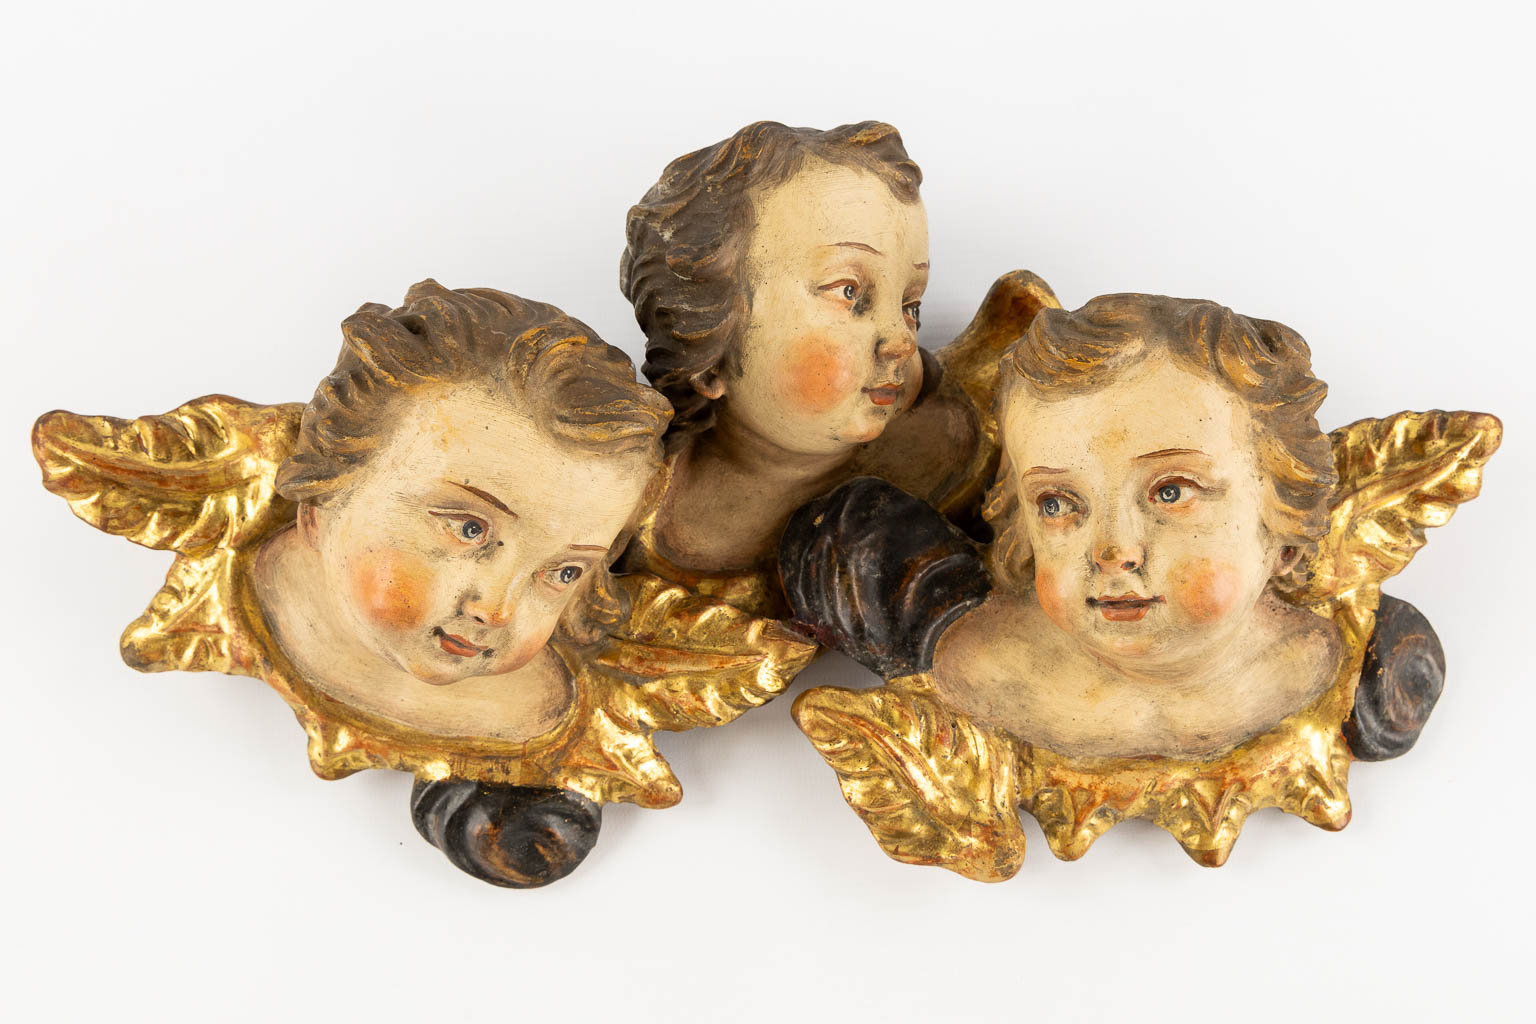 A collection of wood-sculptured and polychromed angels. Circa 1900. (W:39 x H:20 cm)